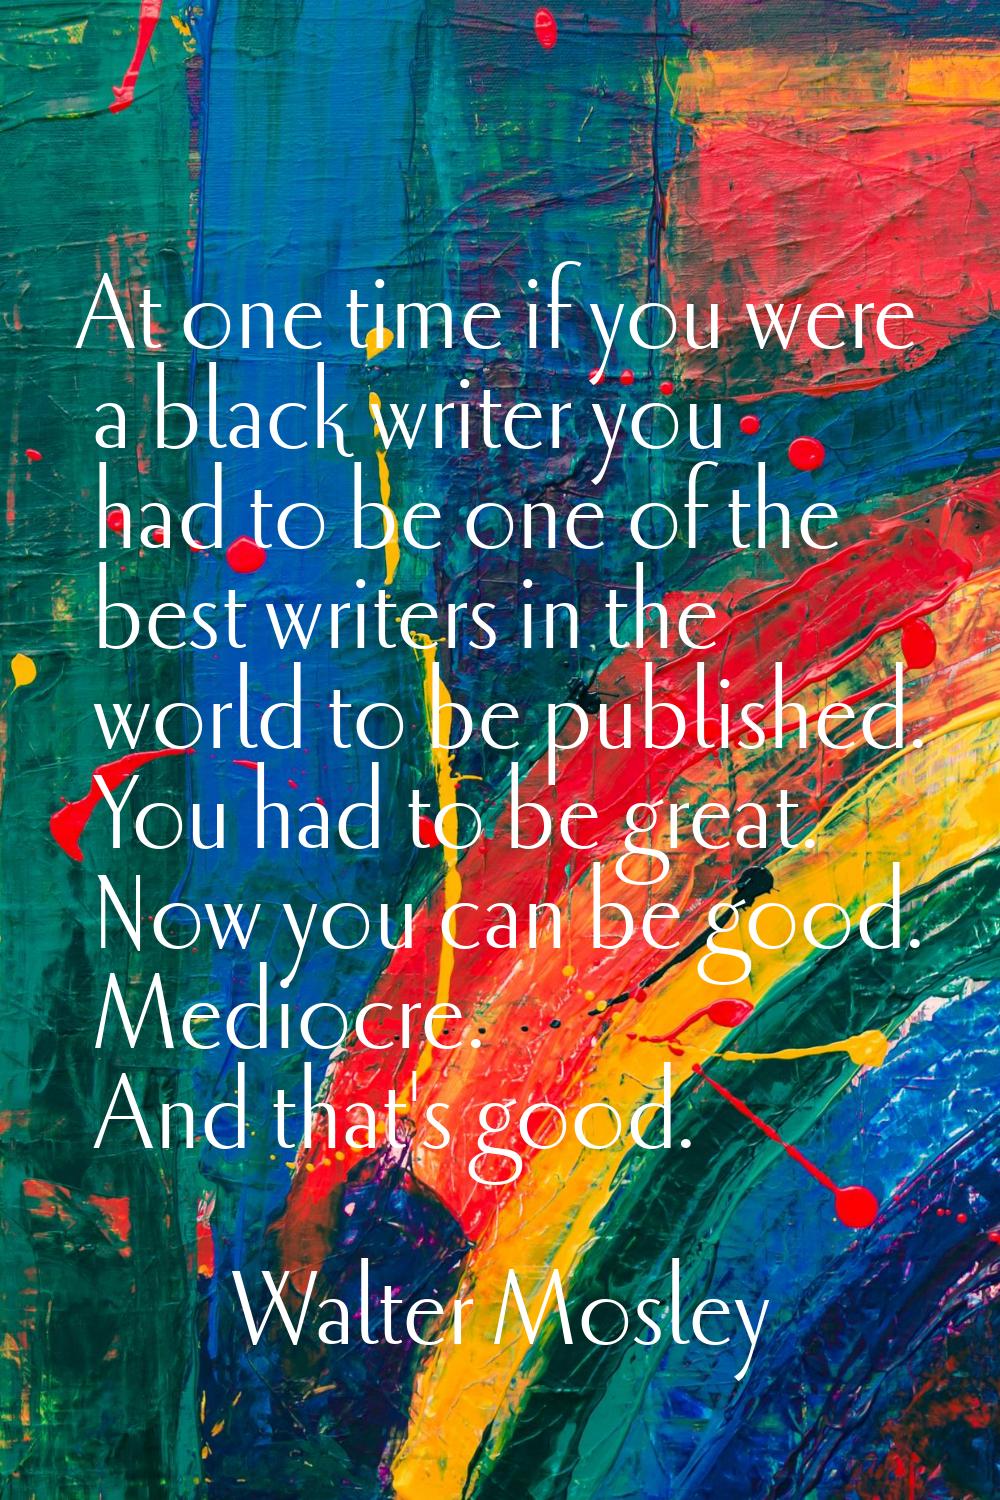 At one time if you were a black writer you had to be one of the best writers in the world to be pub